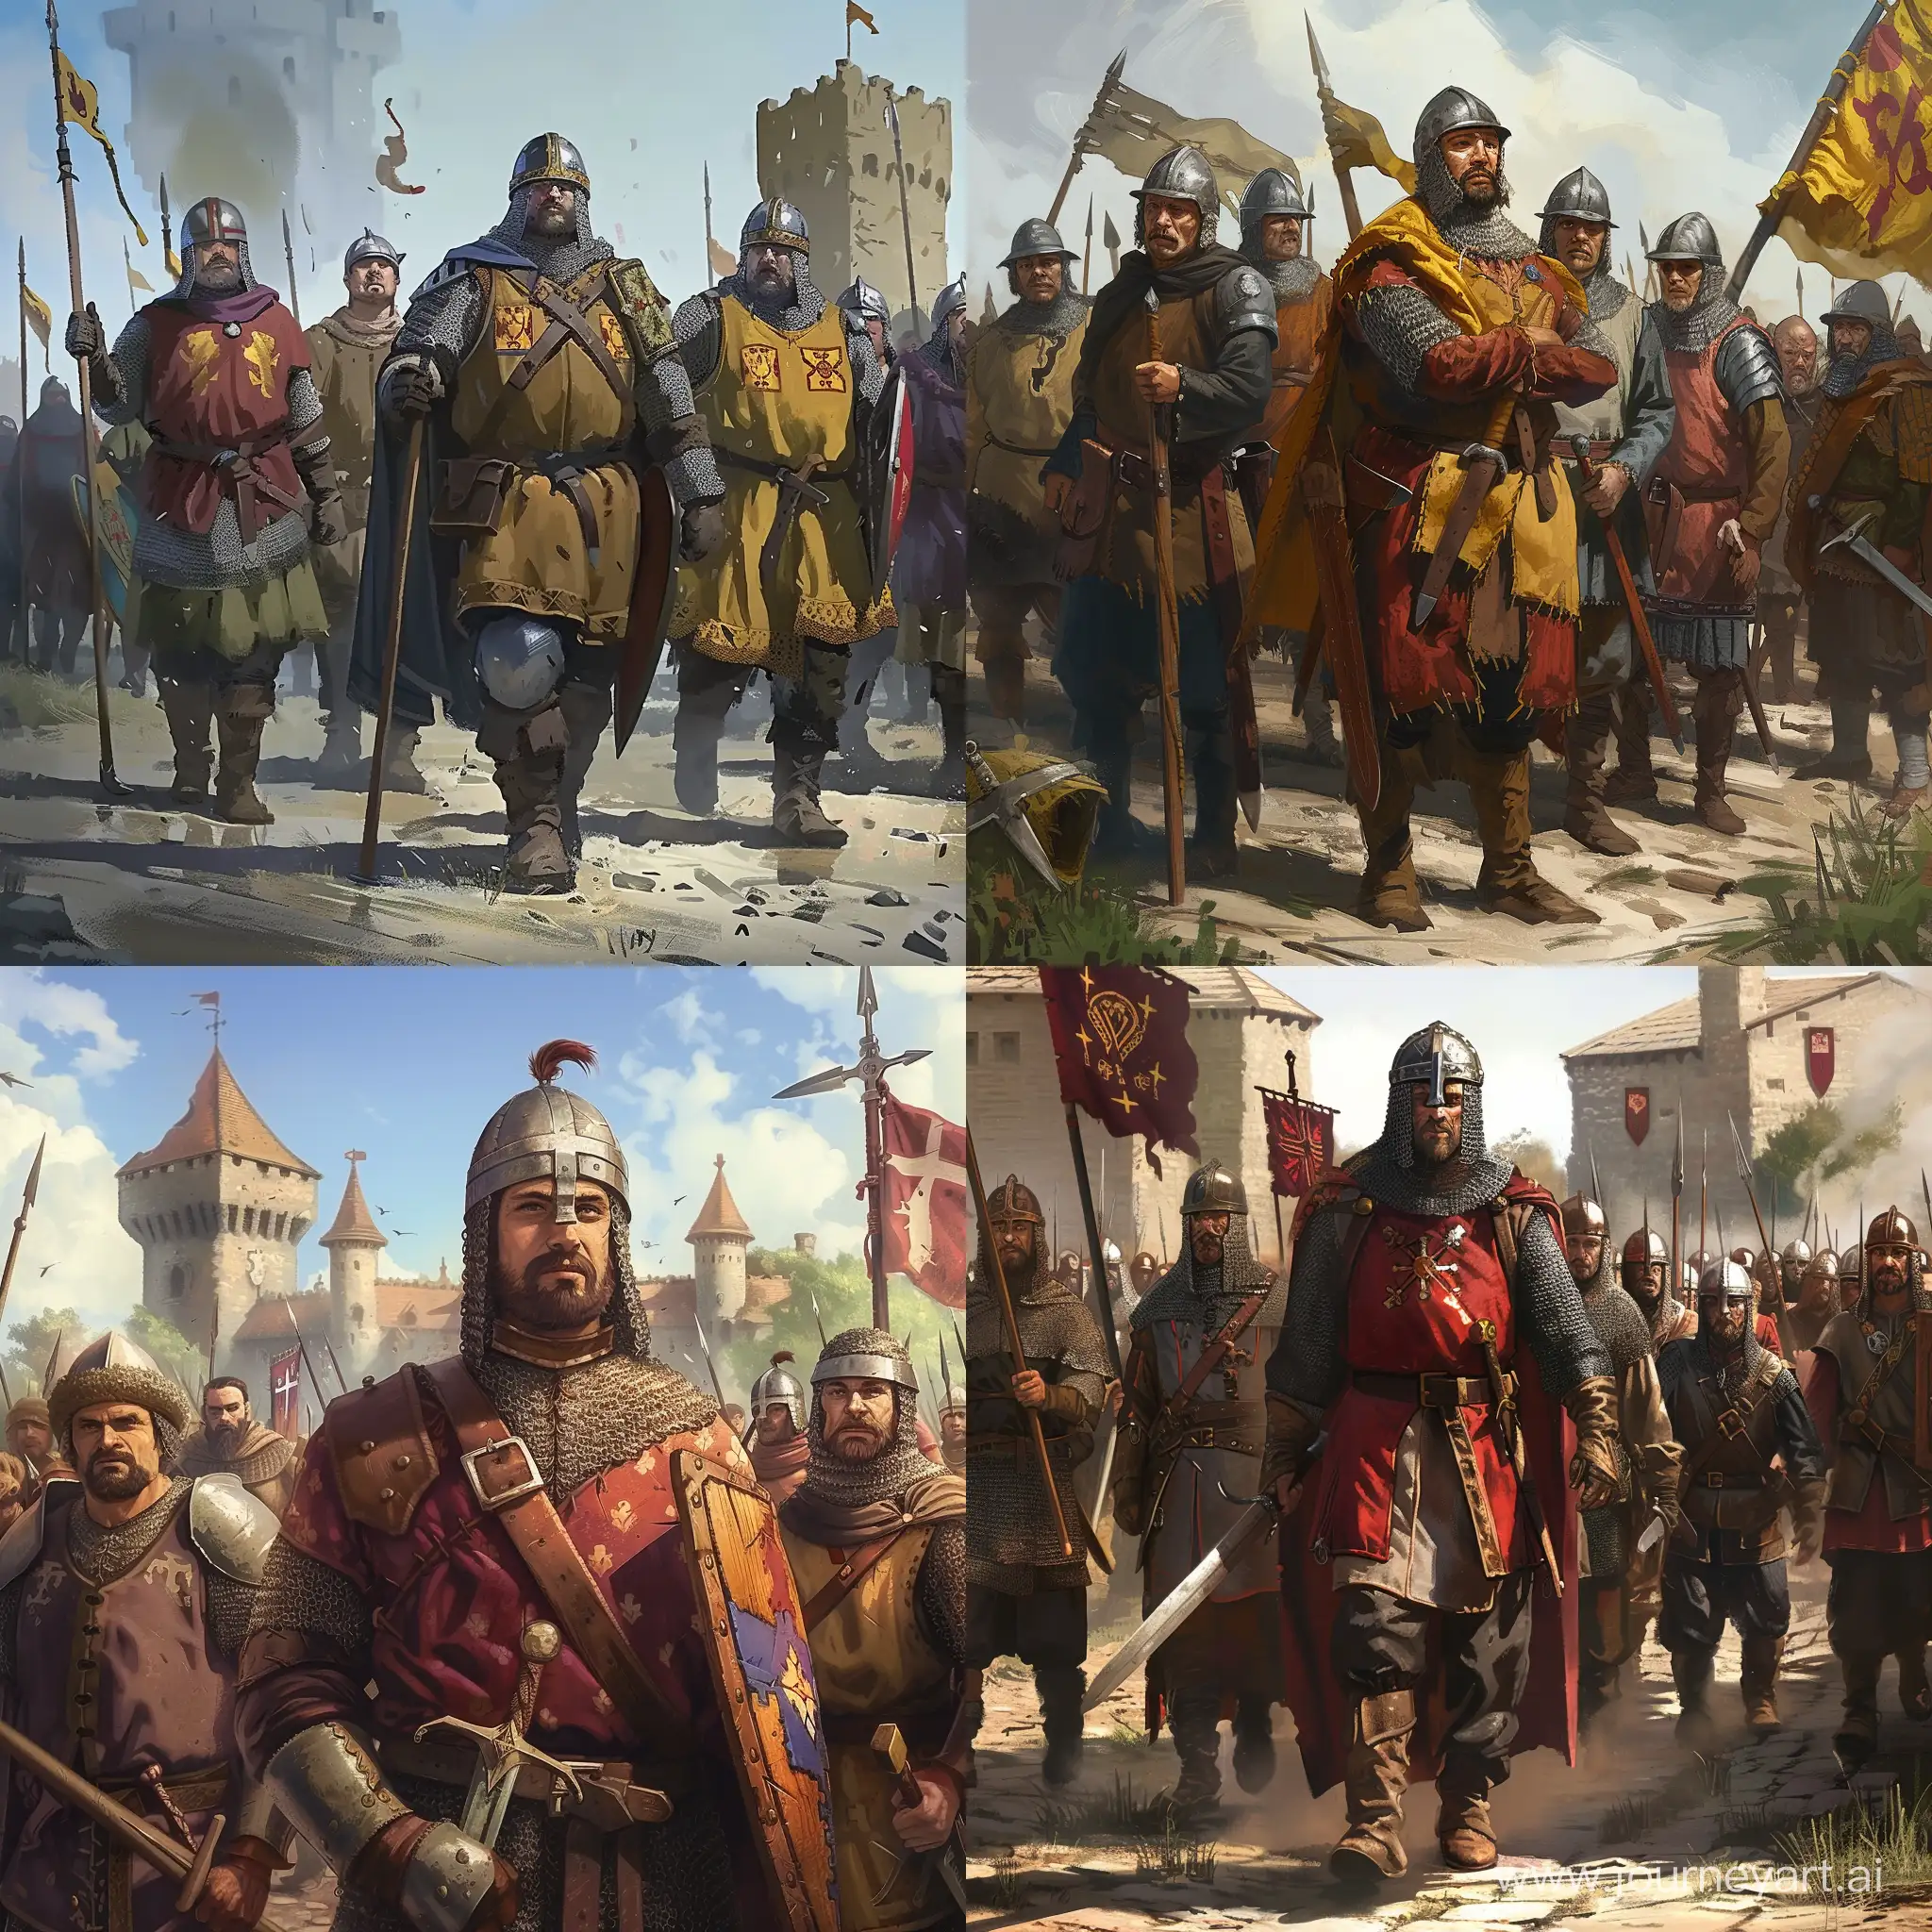 Draw art with a medieval peasant militia in the style of the game Crusader kings 3